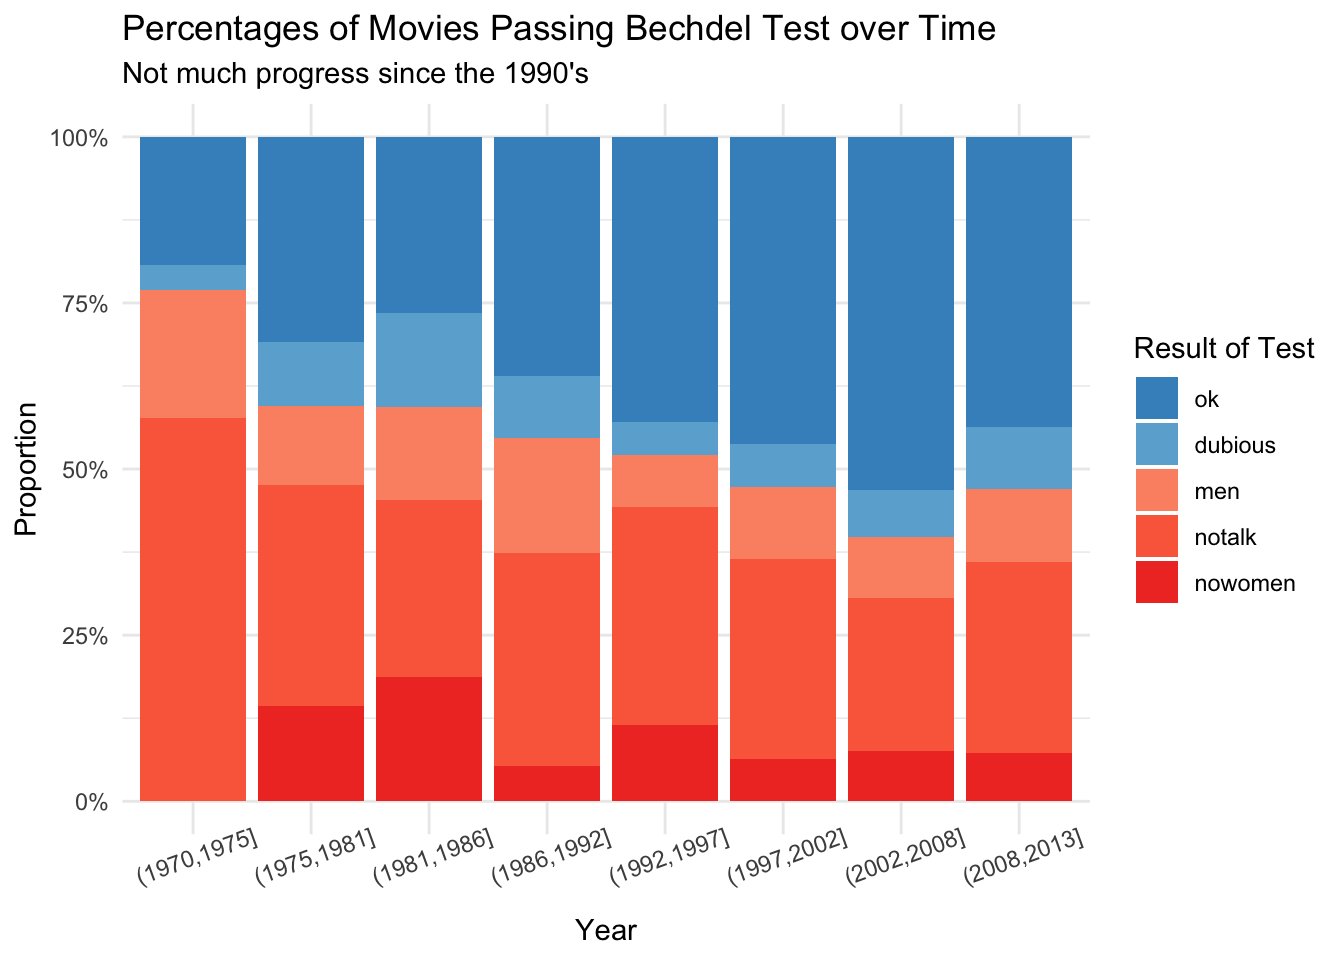 The percentage of movies passing the Bechdel test over time has not seen much progress since the 1990's.